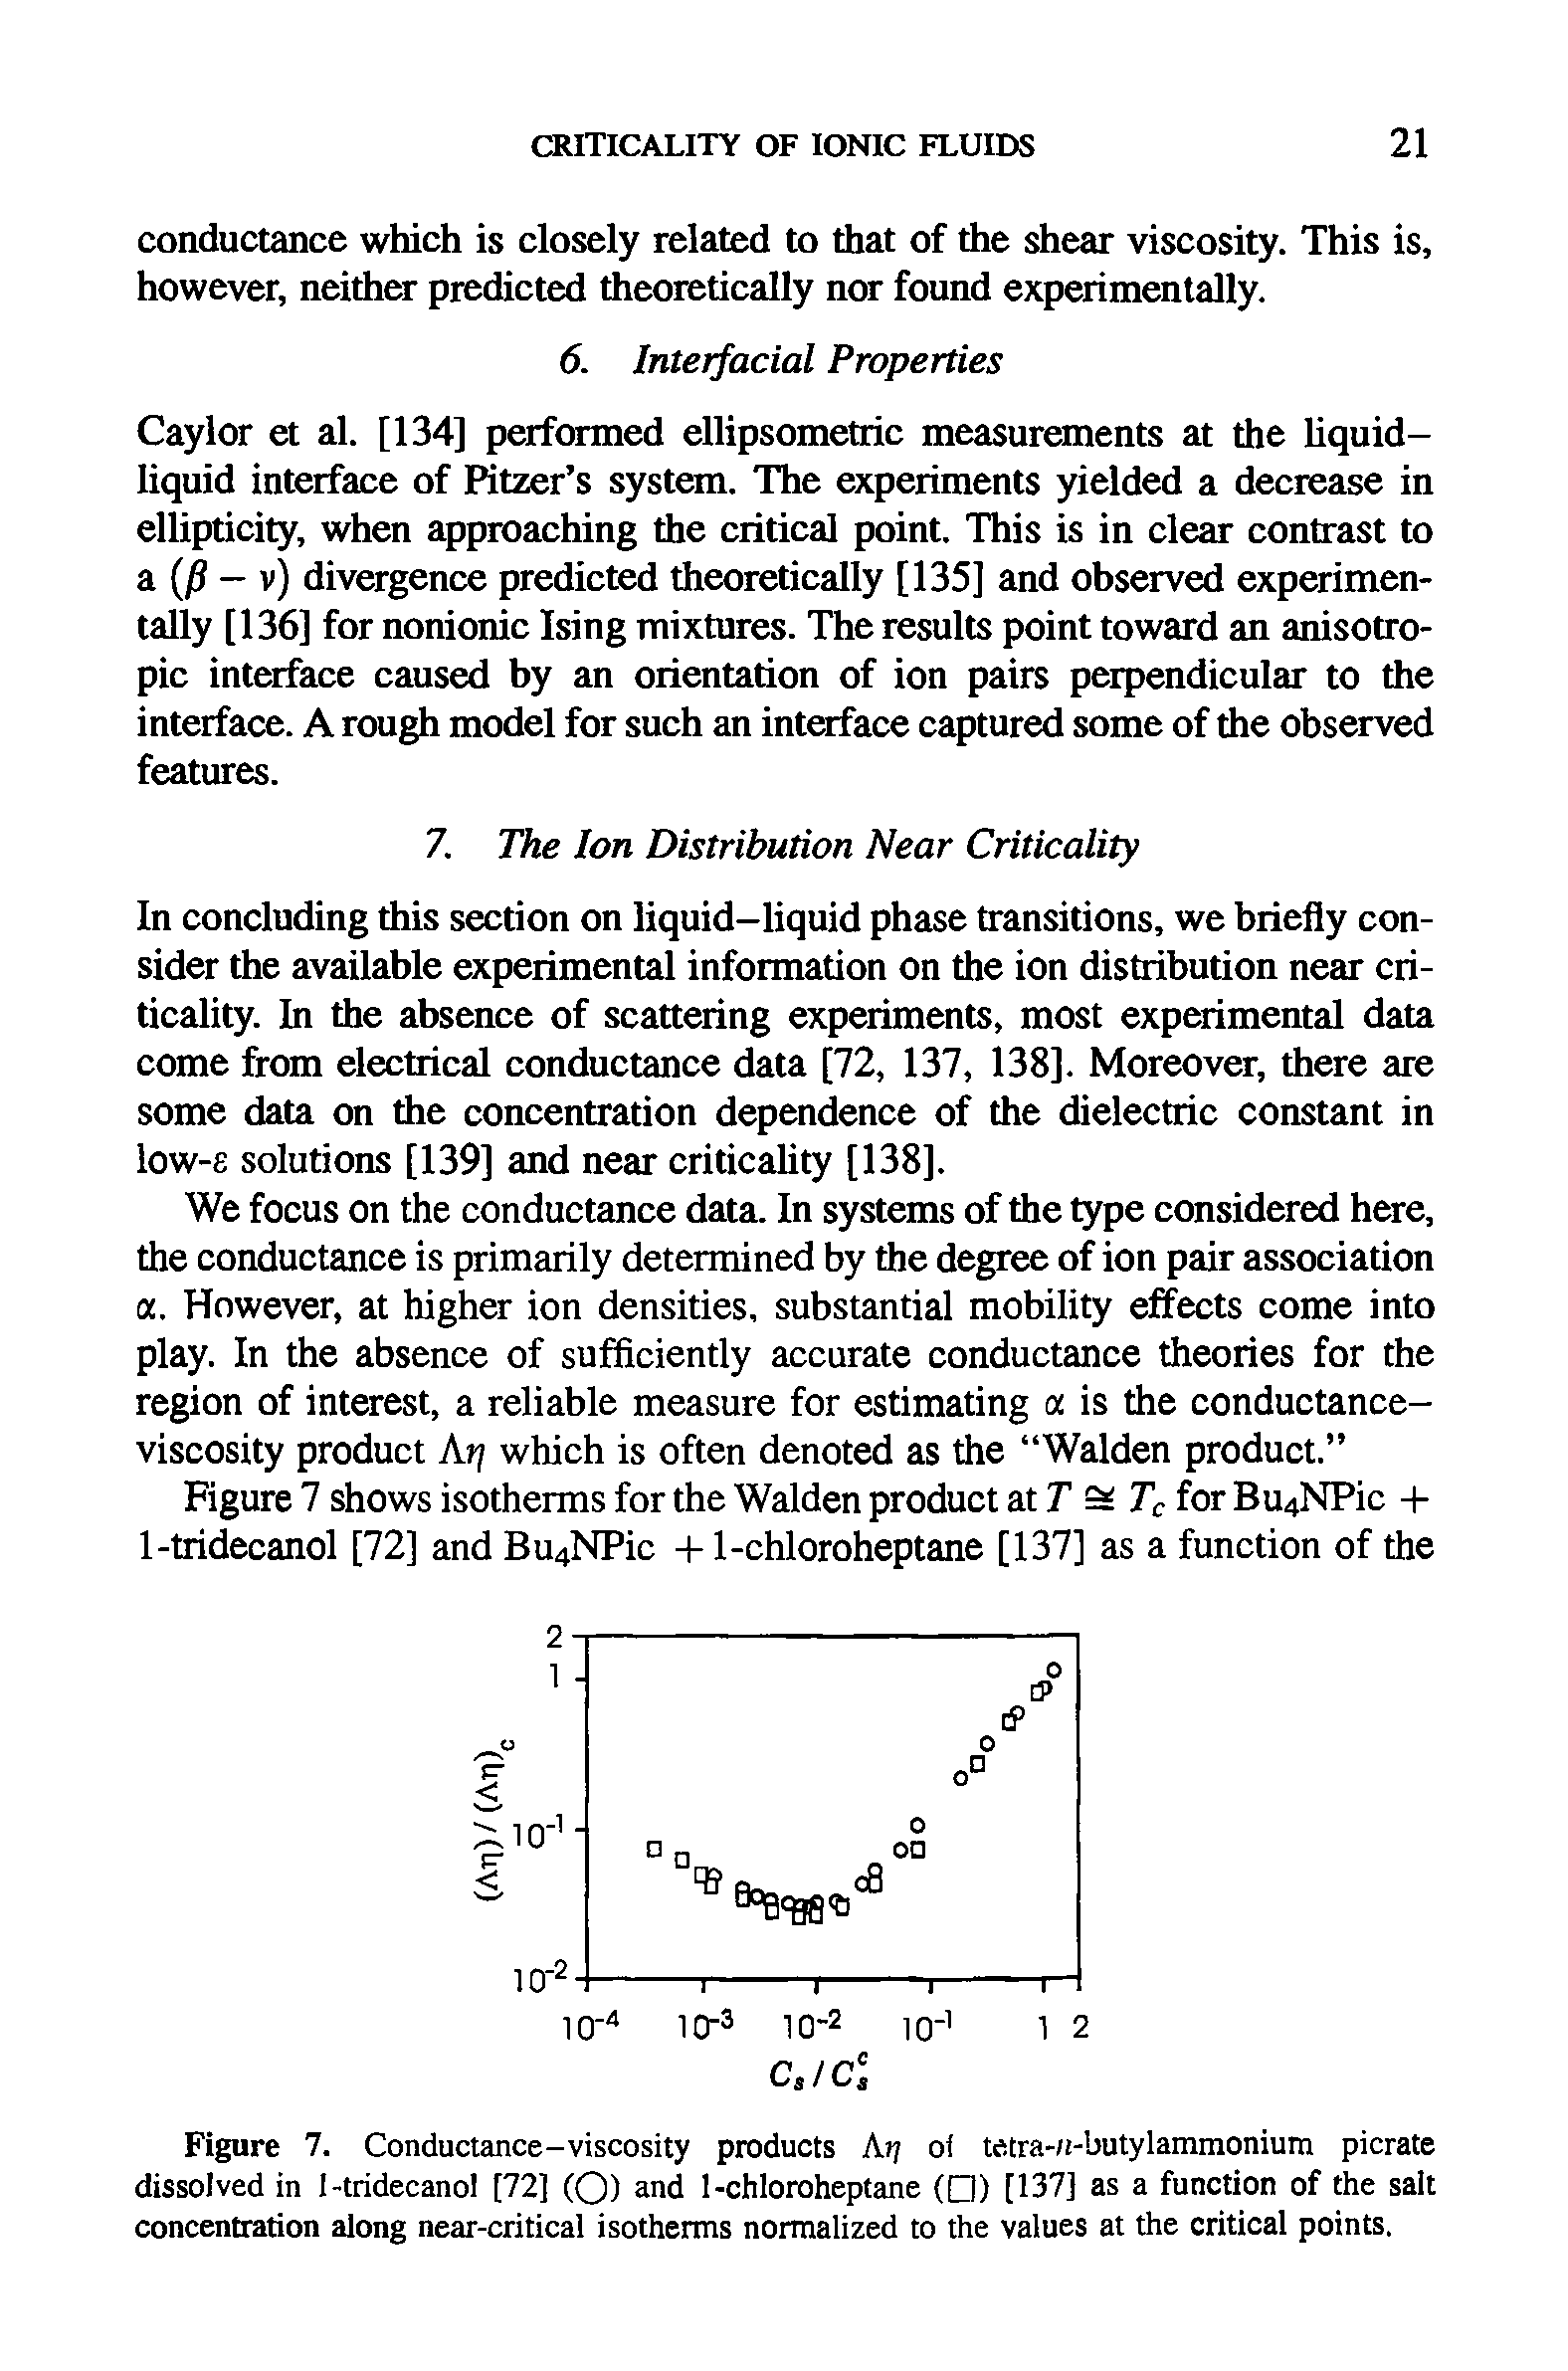 Figure 7. Conductance-viscosity products Ai of tetra-n-butylammonium picrate dissolved in 1-tridecanol [72] (O) and 1-chloroheptane ( ) [137] as a function of the salt concentration along near-critical isotherms normalized to the values at the critical points.